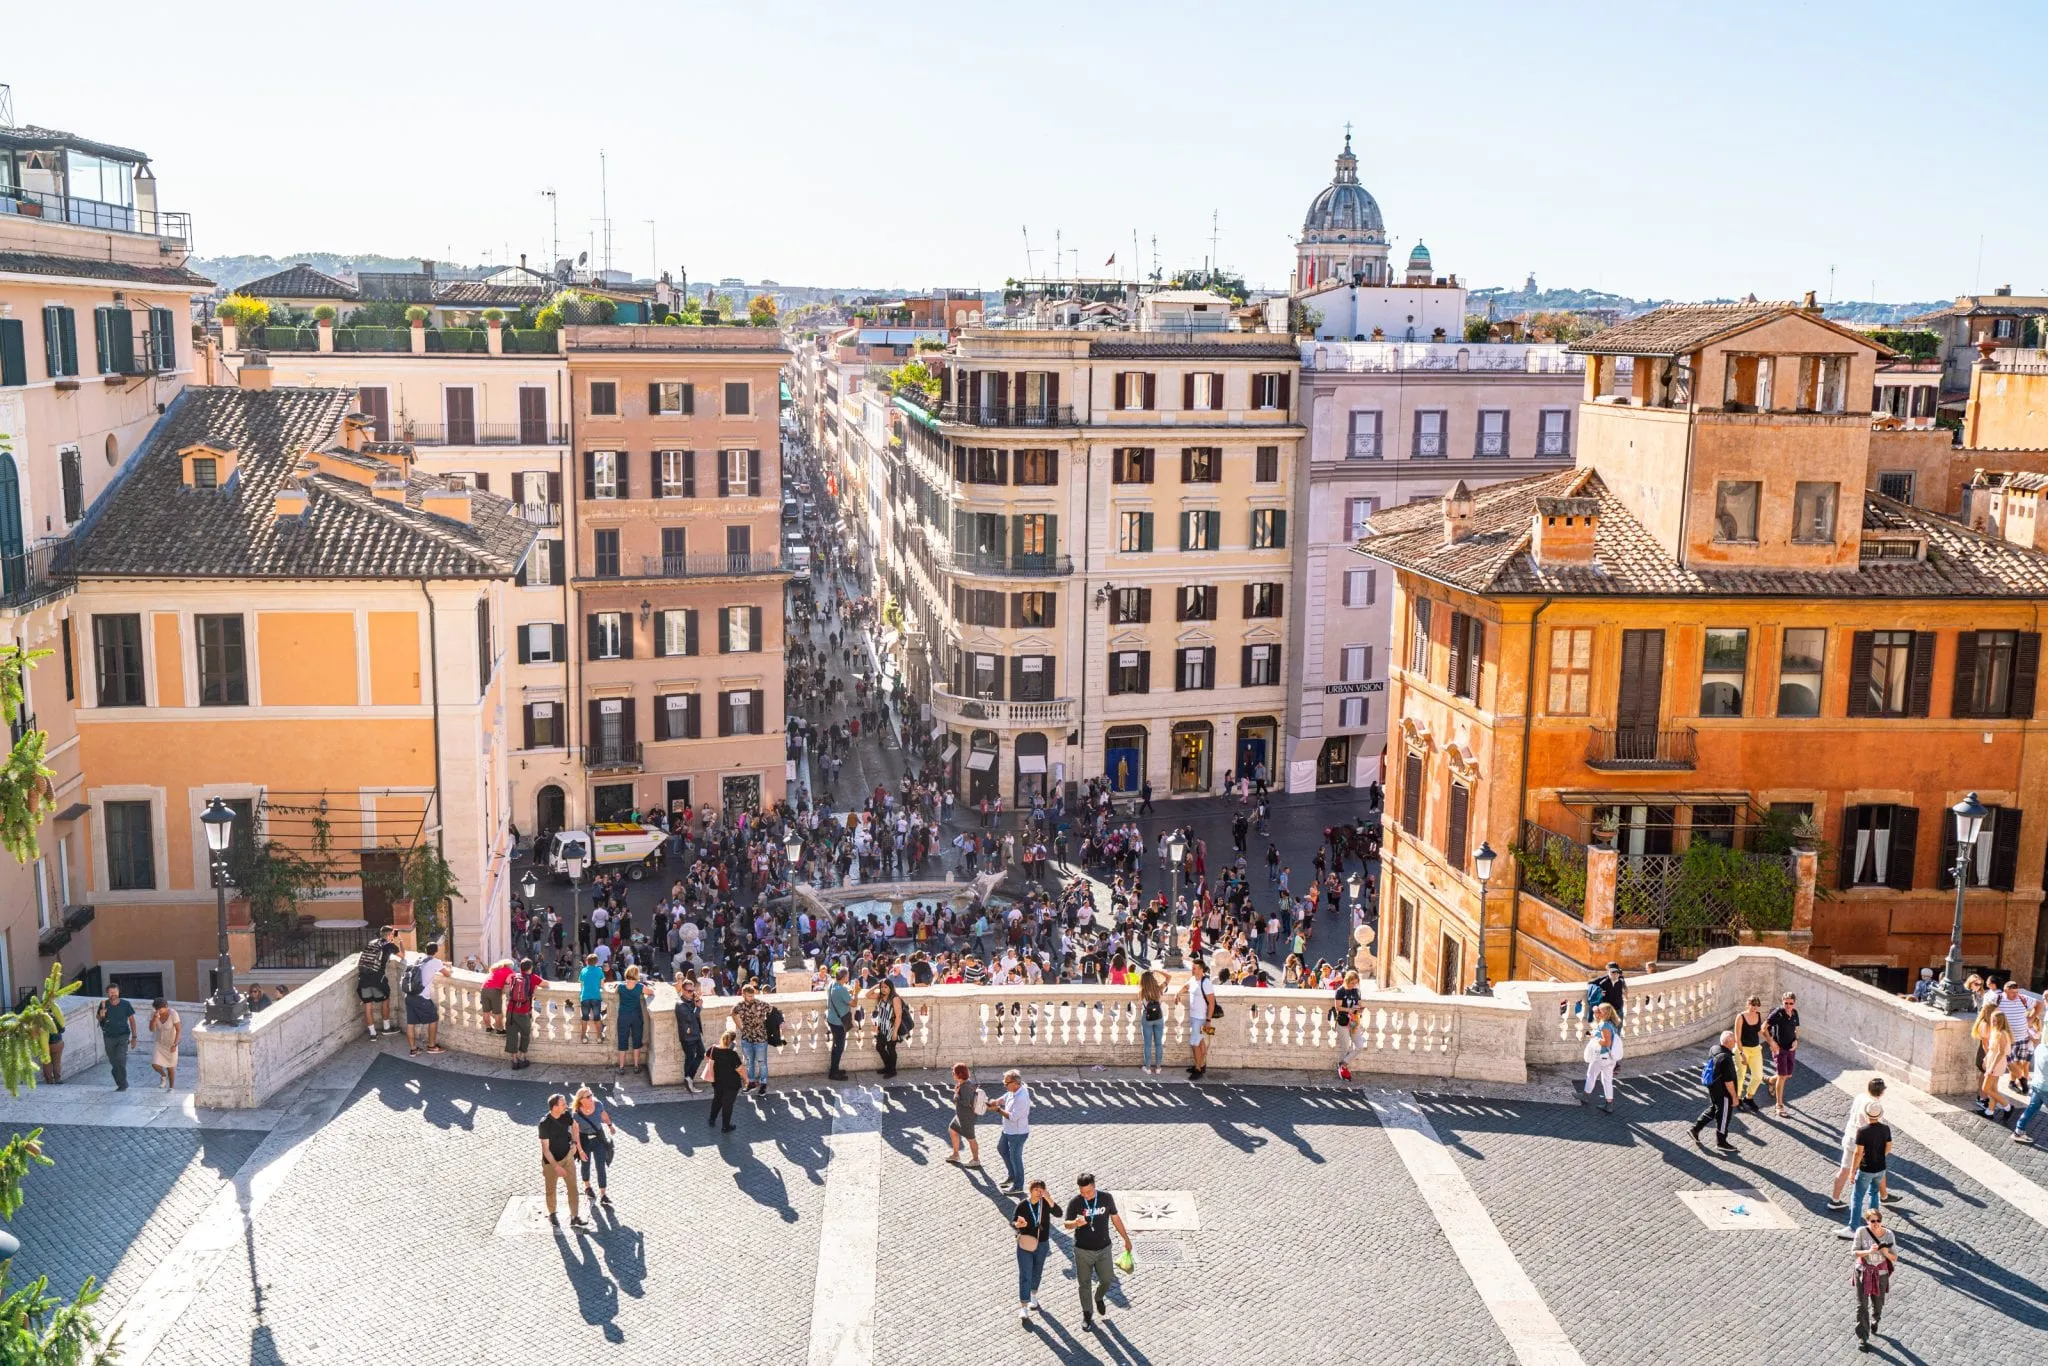 View of Piazza di Spagna from above, one of the best viewpoints in Rome